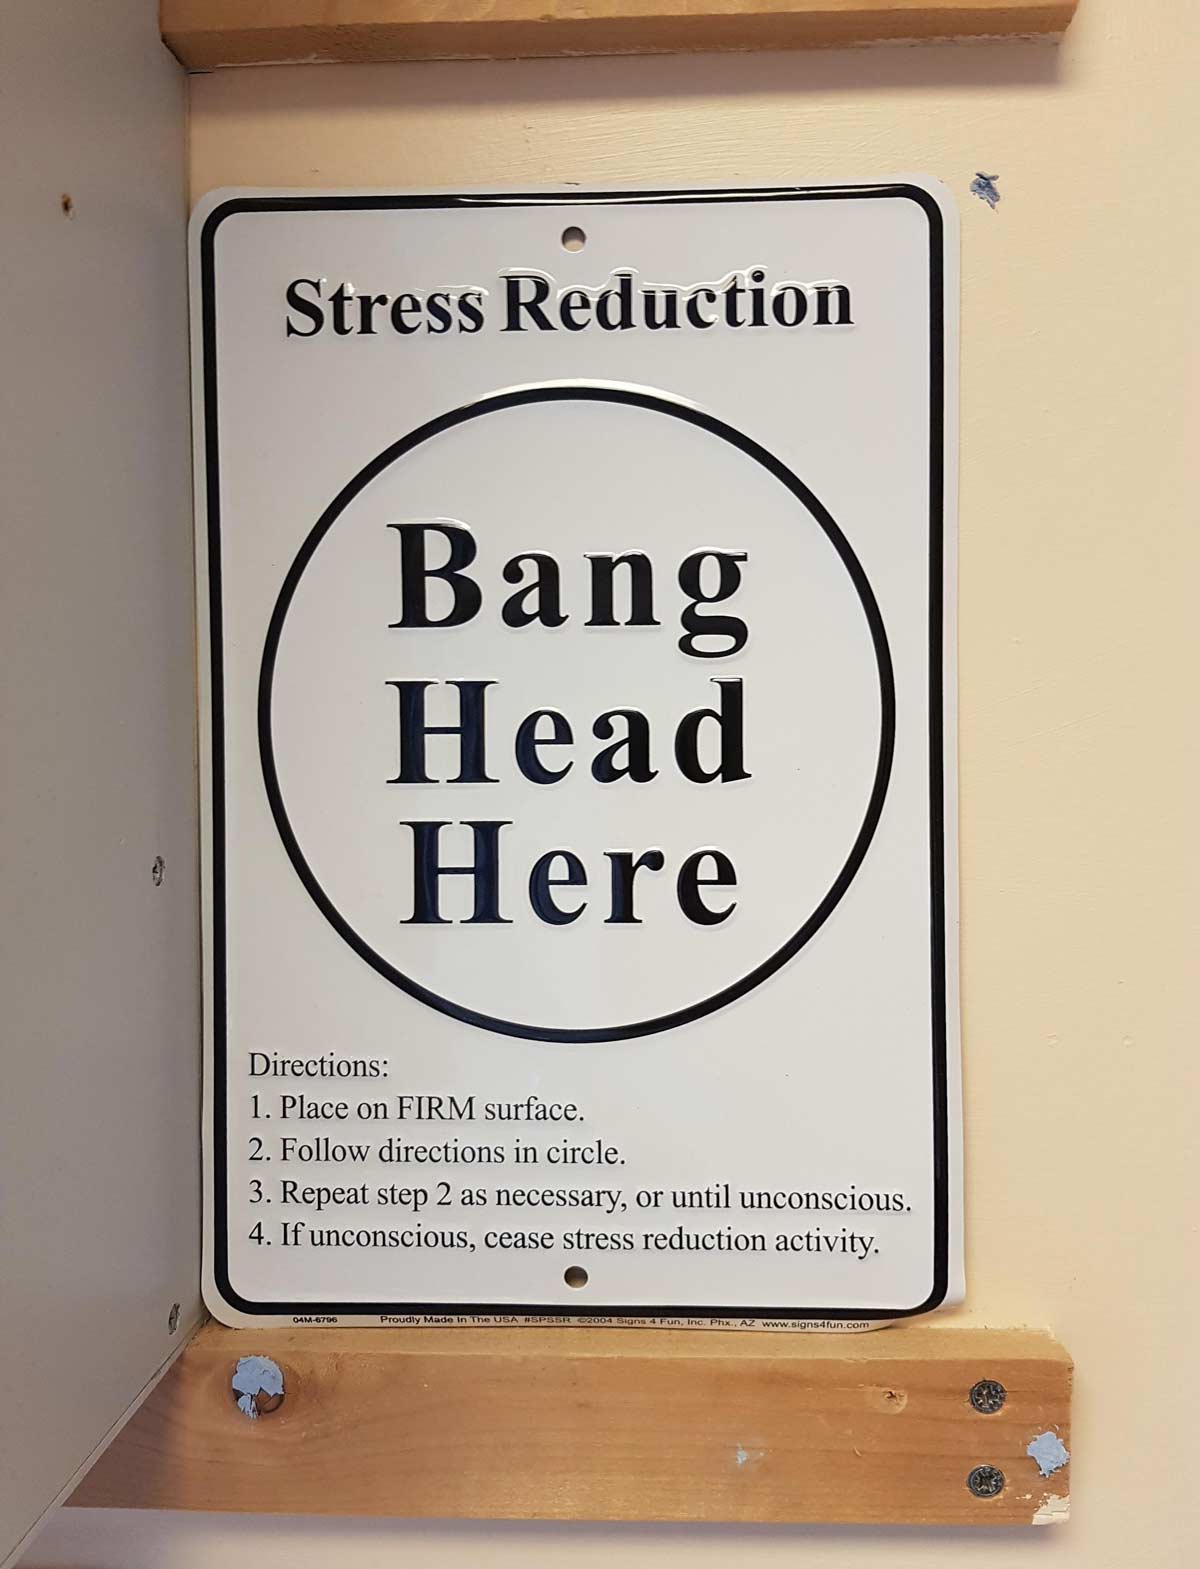 Effective Stress Reduction